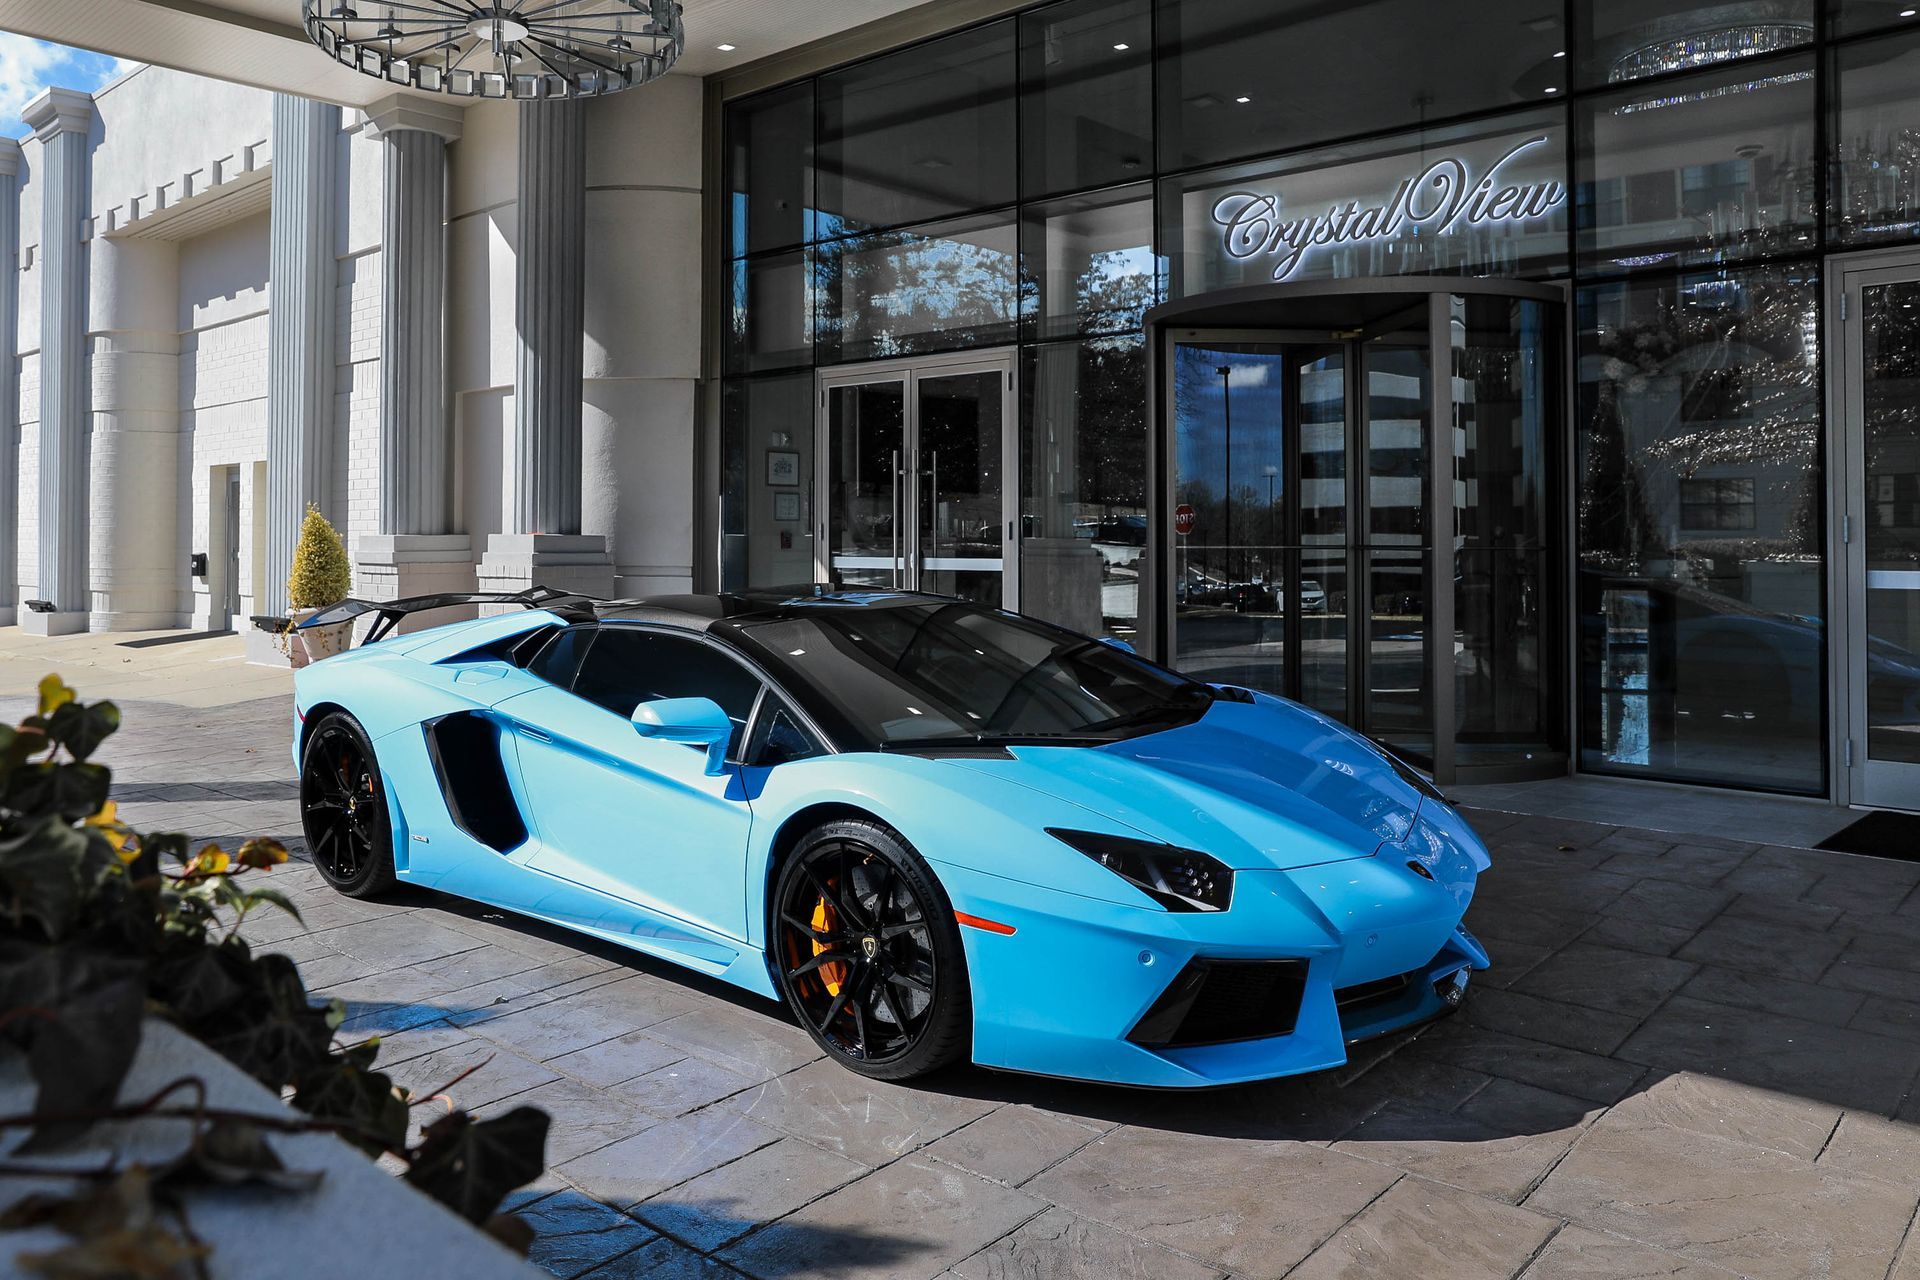 top view of luxury car Lamborghini Aventador available for photo opportunities